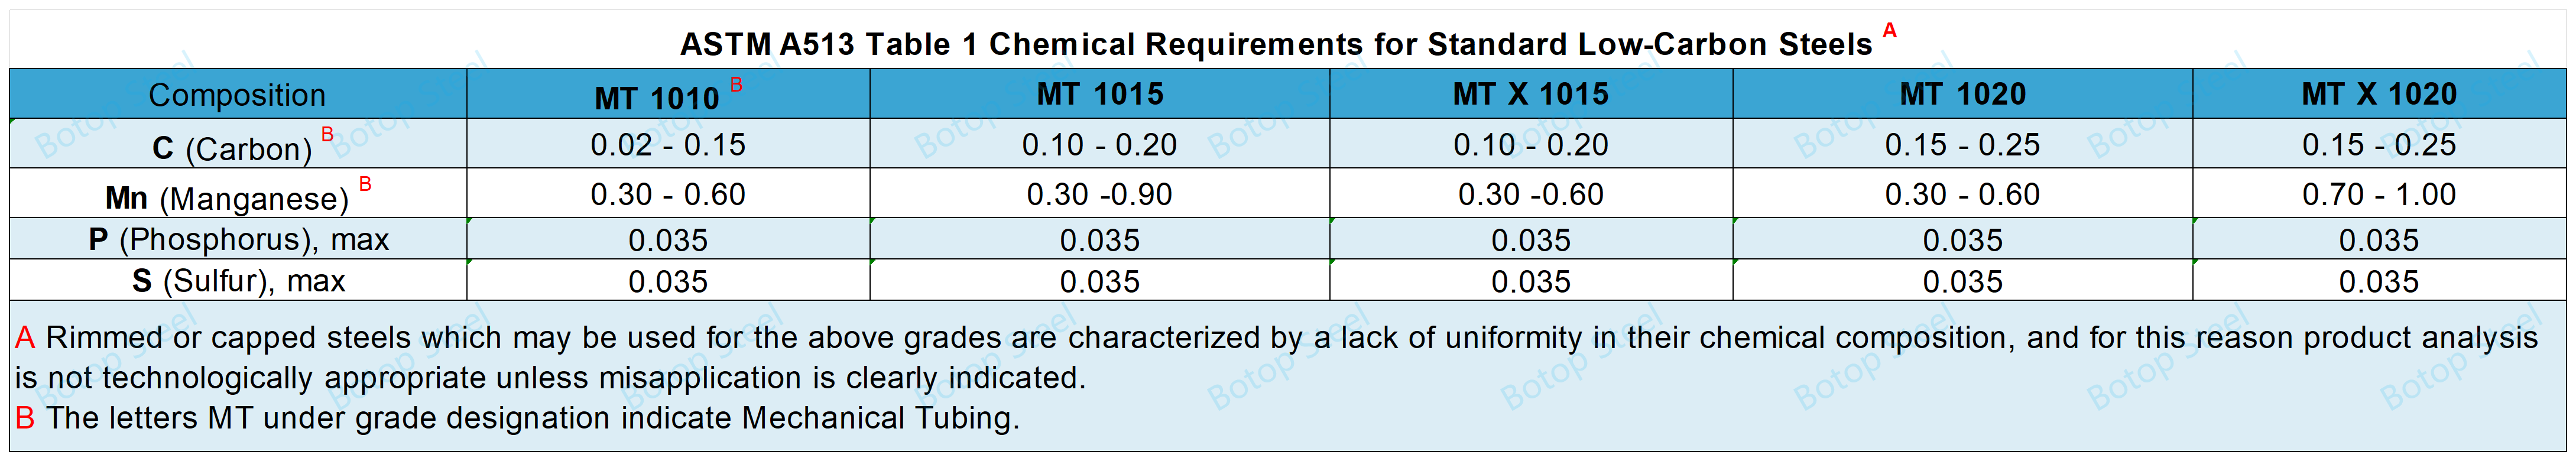 astm a513_ Table 1 Chemical Requirements